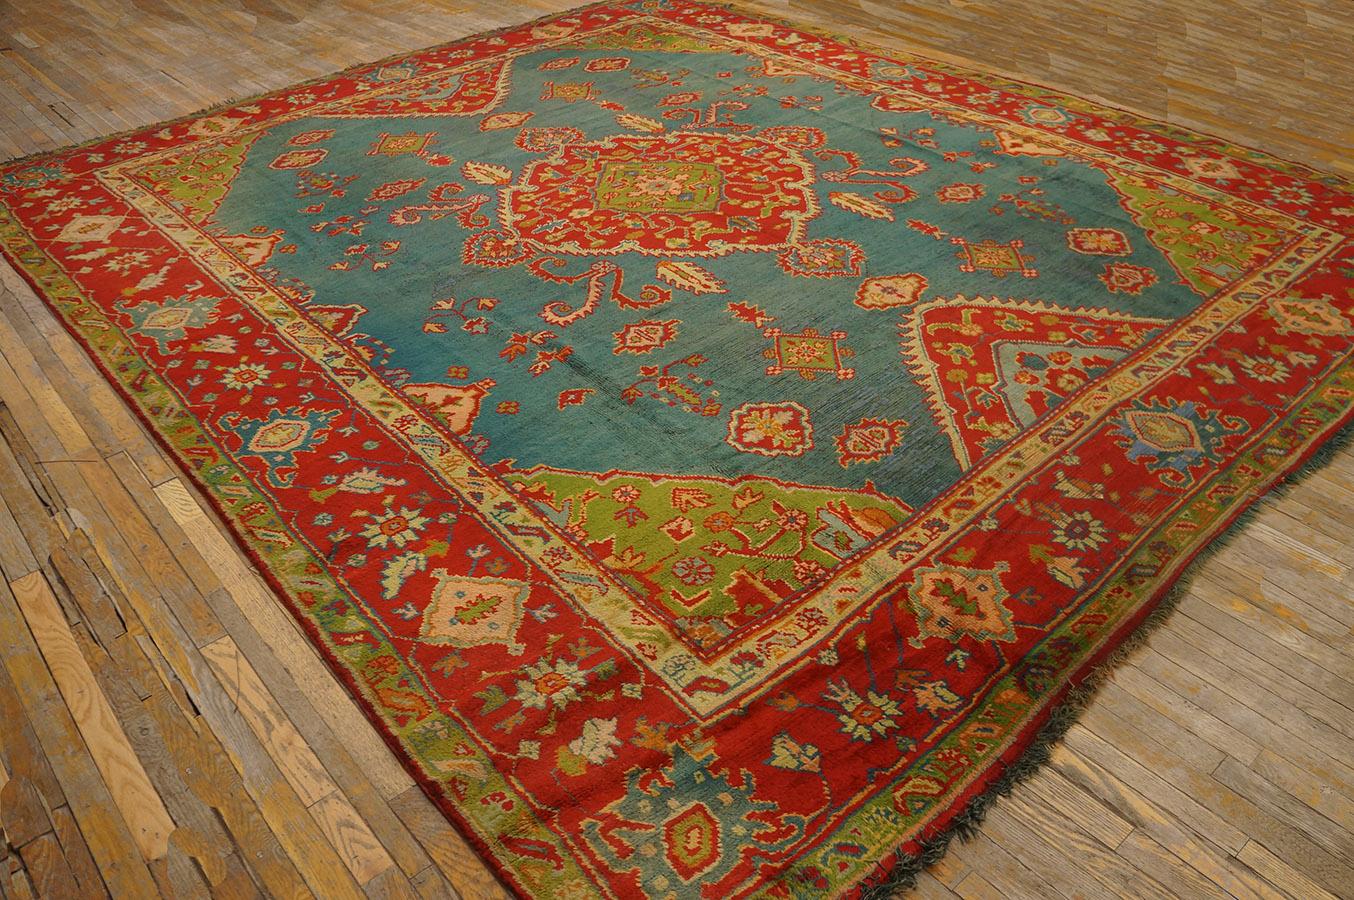 Late 19th Century Turkish Oushak Carpet ( 11' 2'' x 13' 1'' - 340 x 398 cm ) In Good Condition For Sale In New York, NY